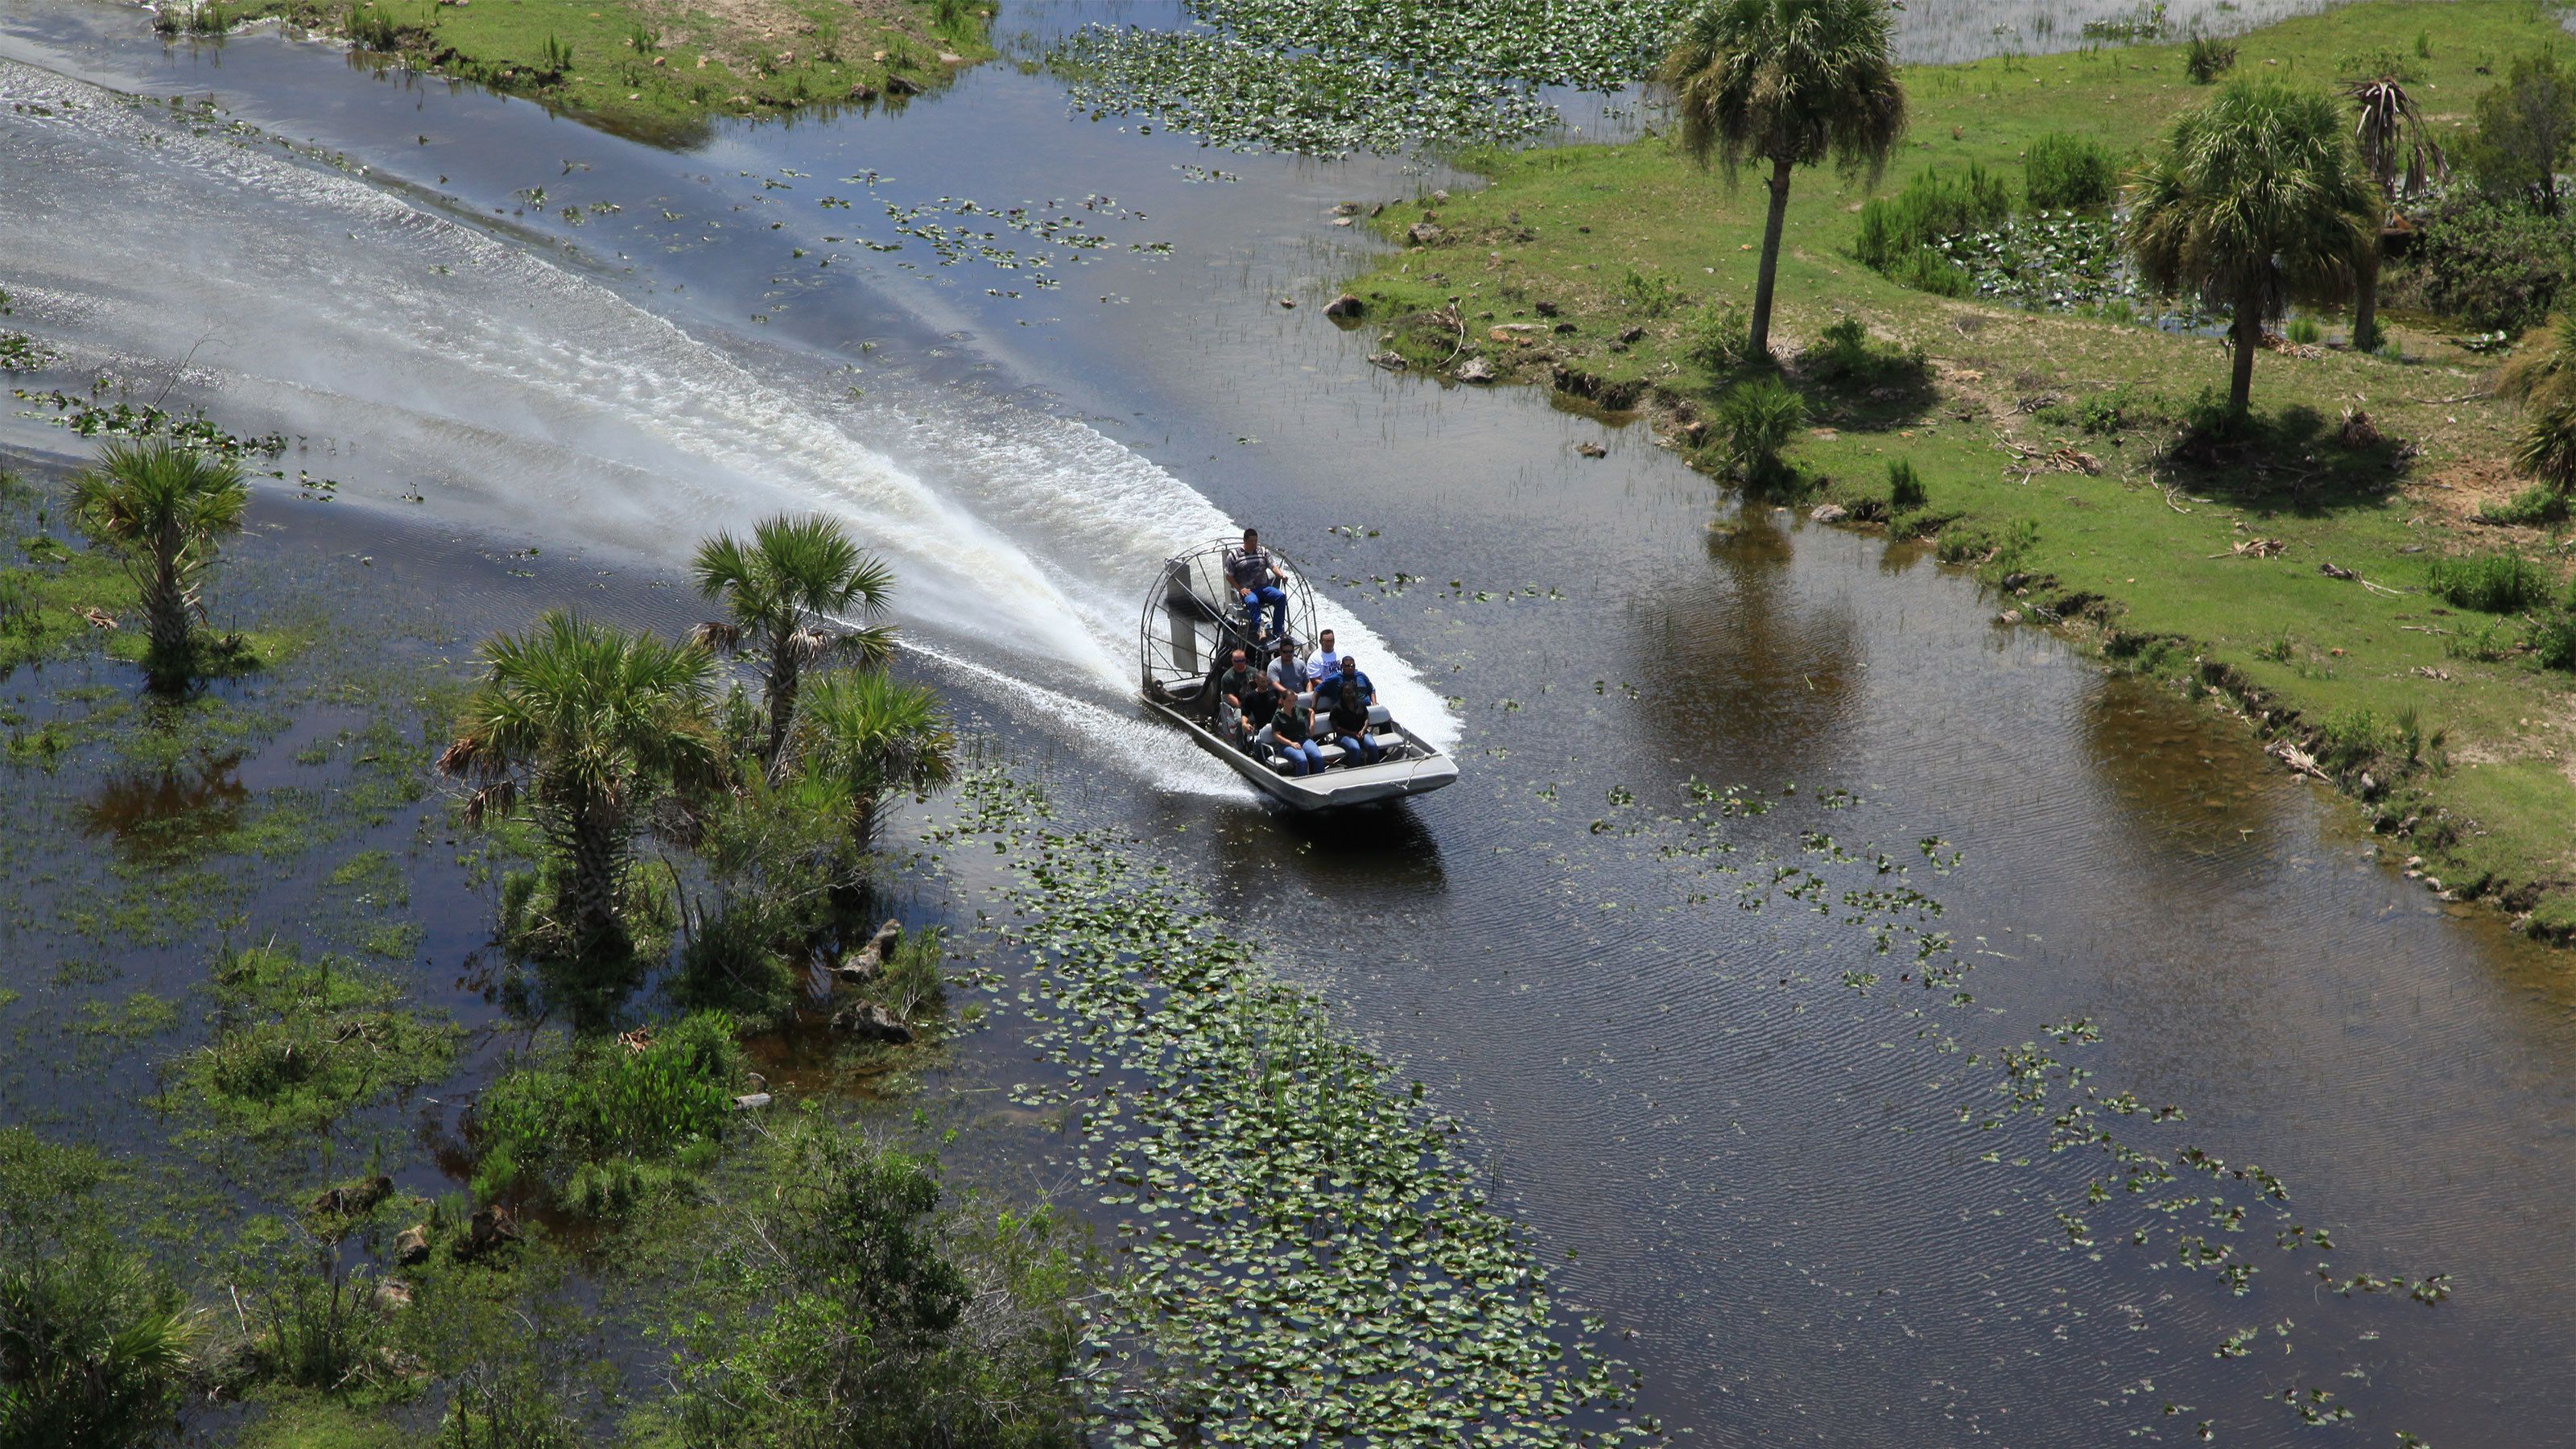 billy's swamp boat tours